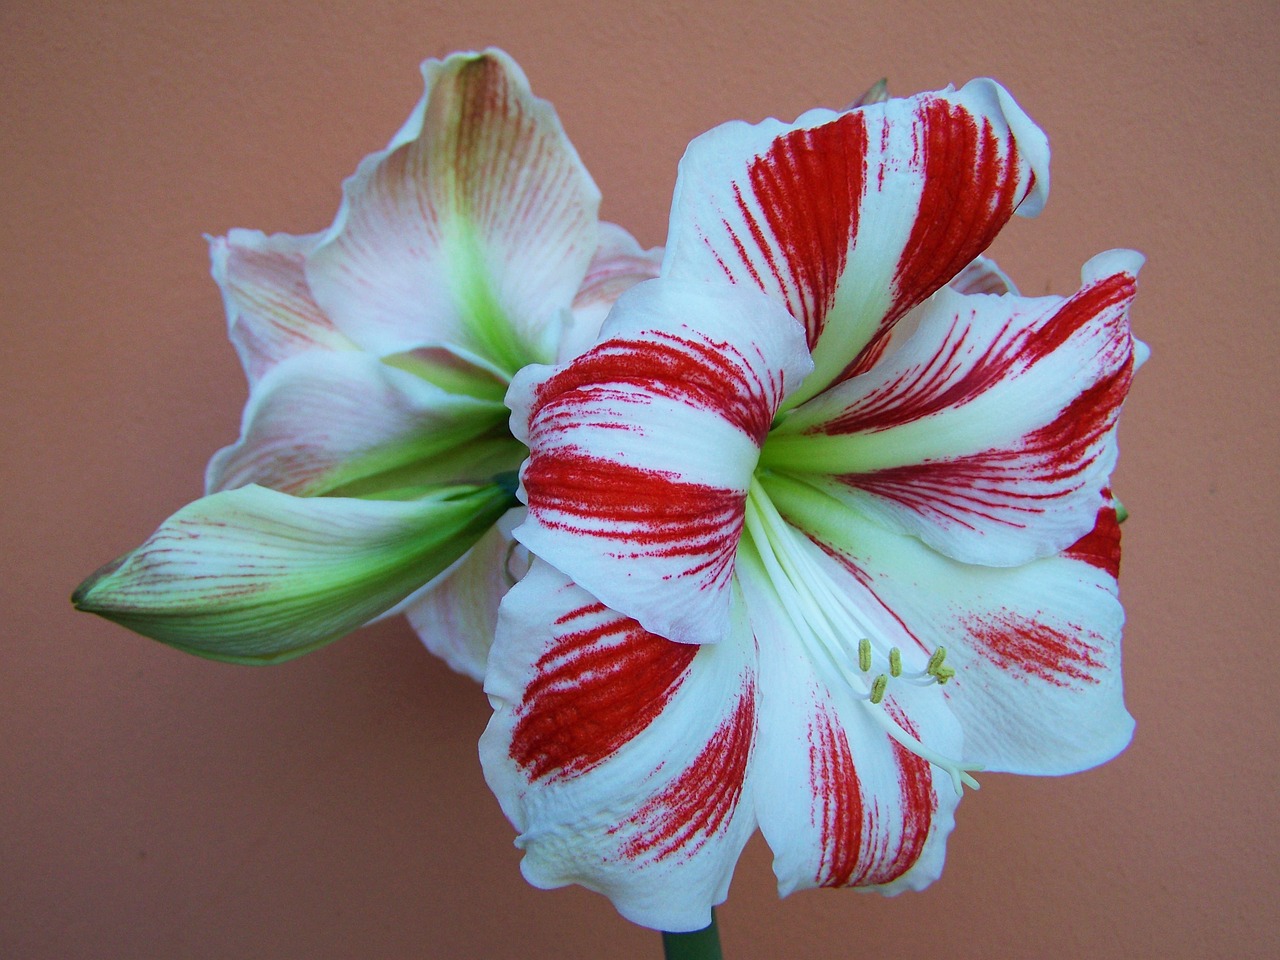 amaryllis red-and-white flowers onion flower free photo